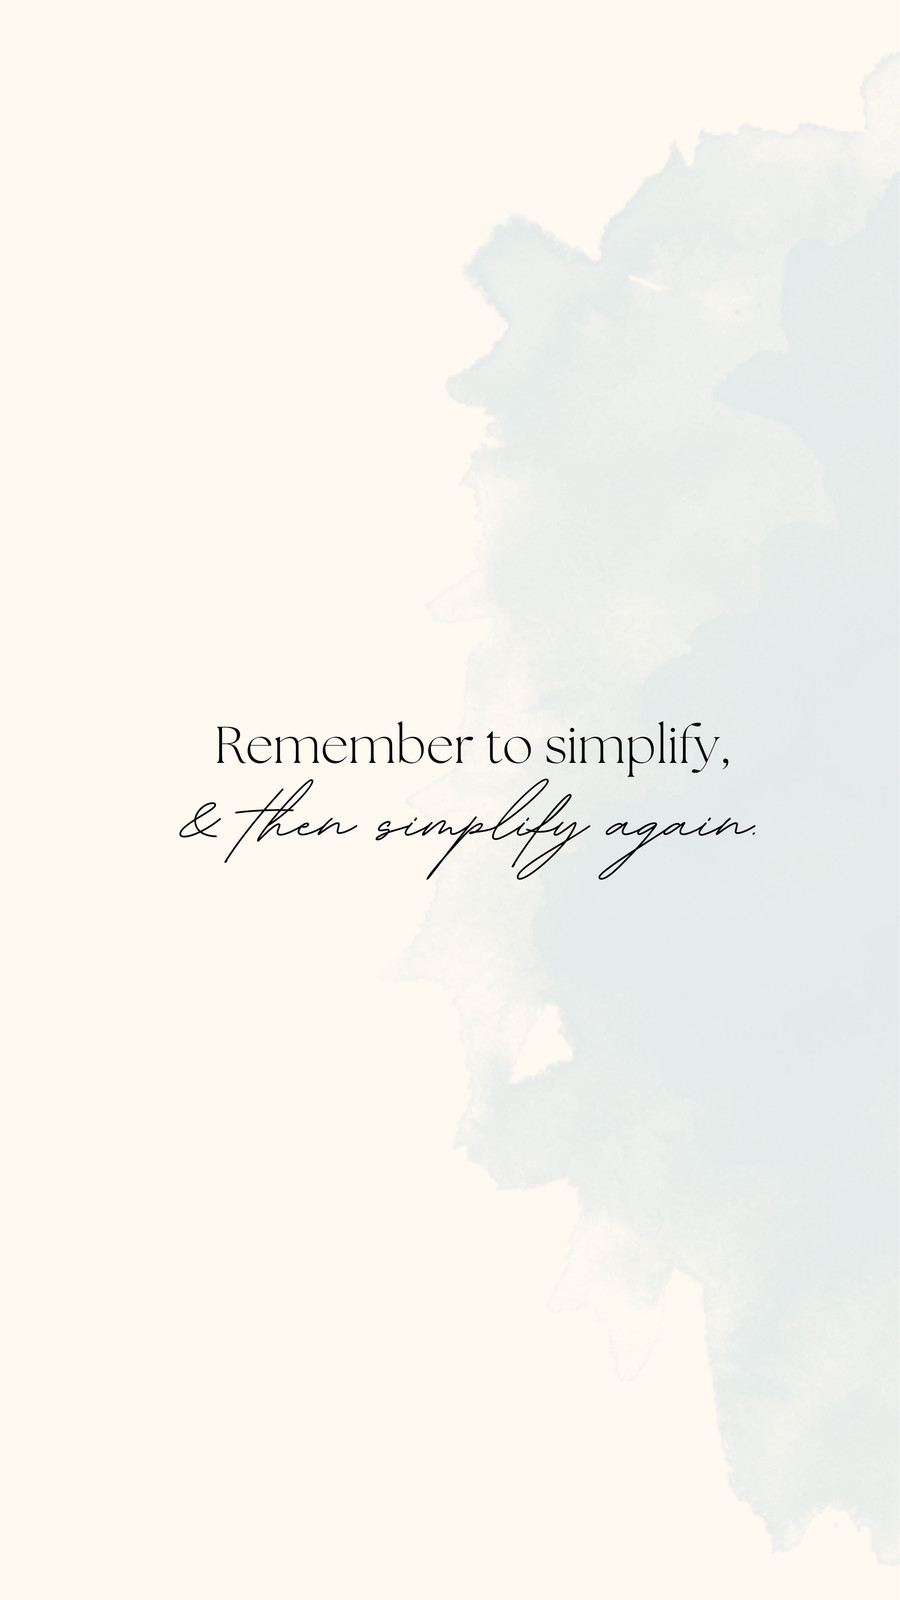 daily quotes wallpaper,text,font,pink,graphic design,line (#691784) -  WallpaperUse